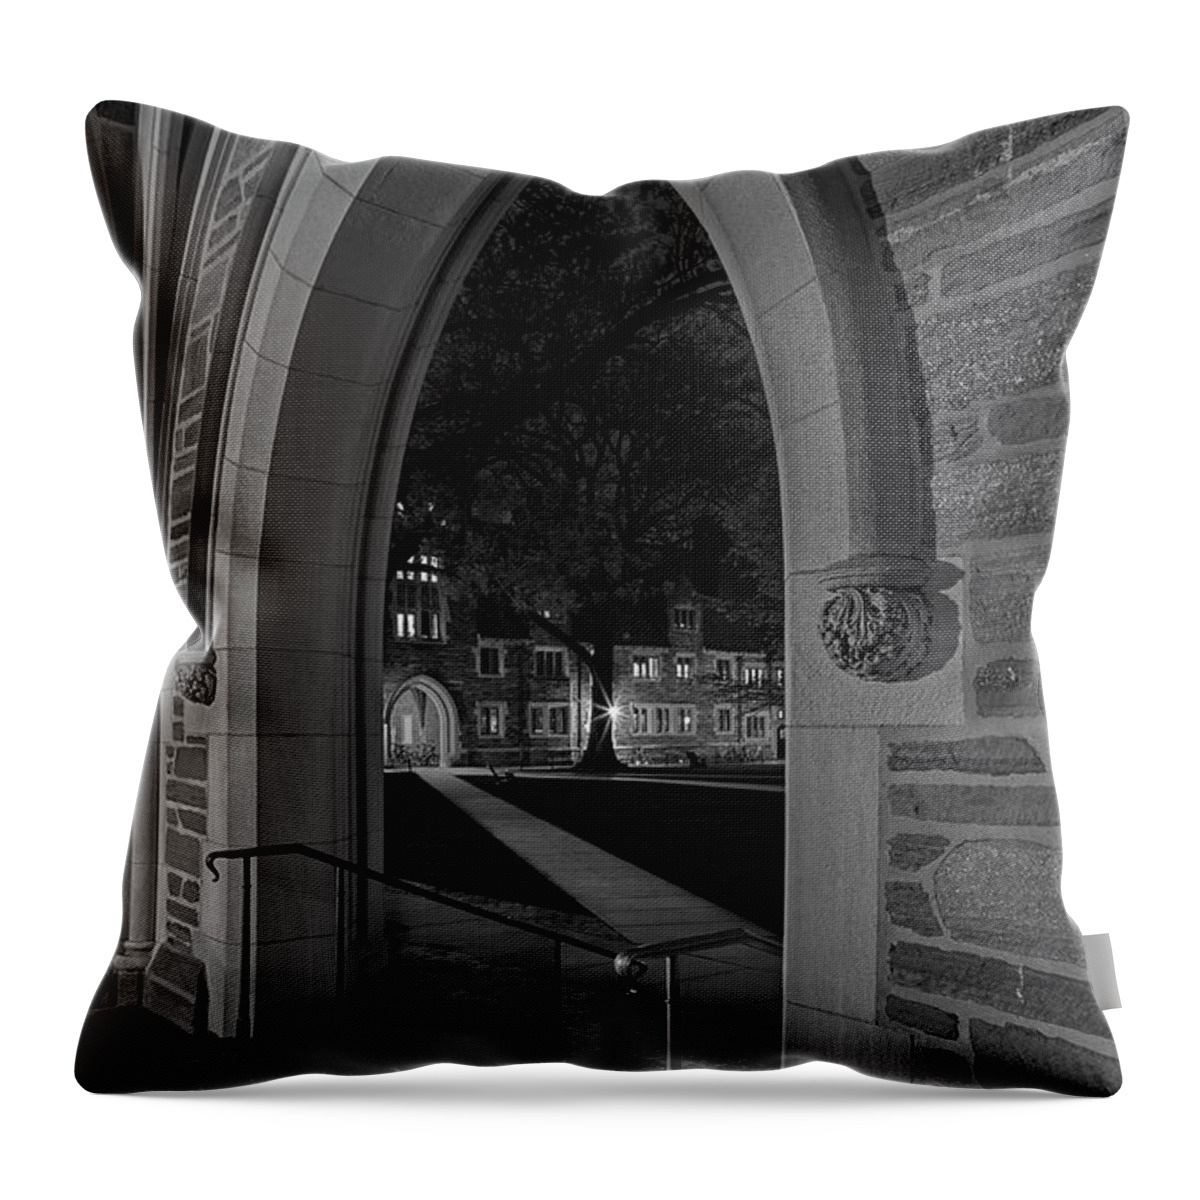 Princeton University Throw Pillow featuring the photograph A view From Holder Hall Princeton University BW by Susan Candelario